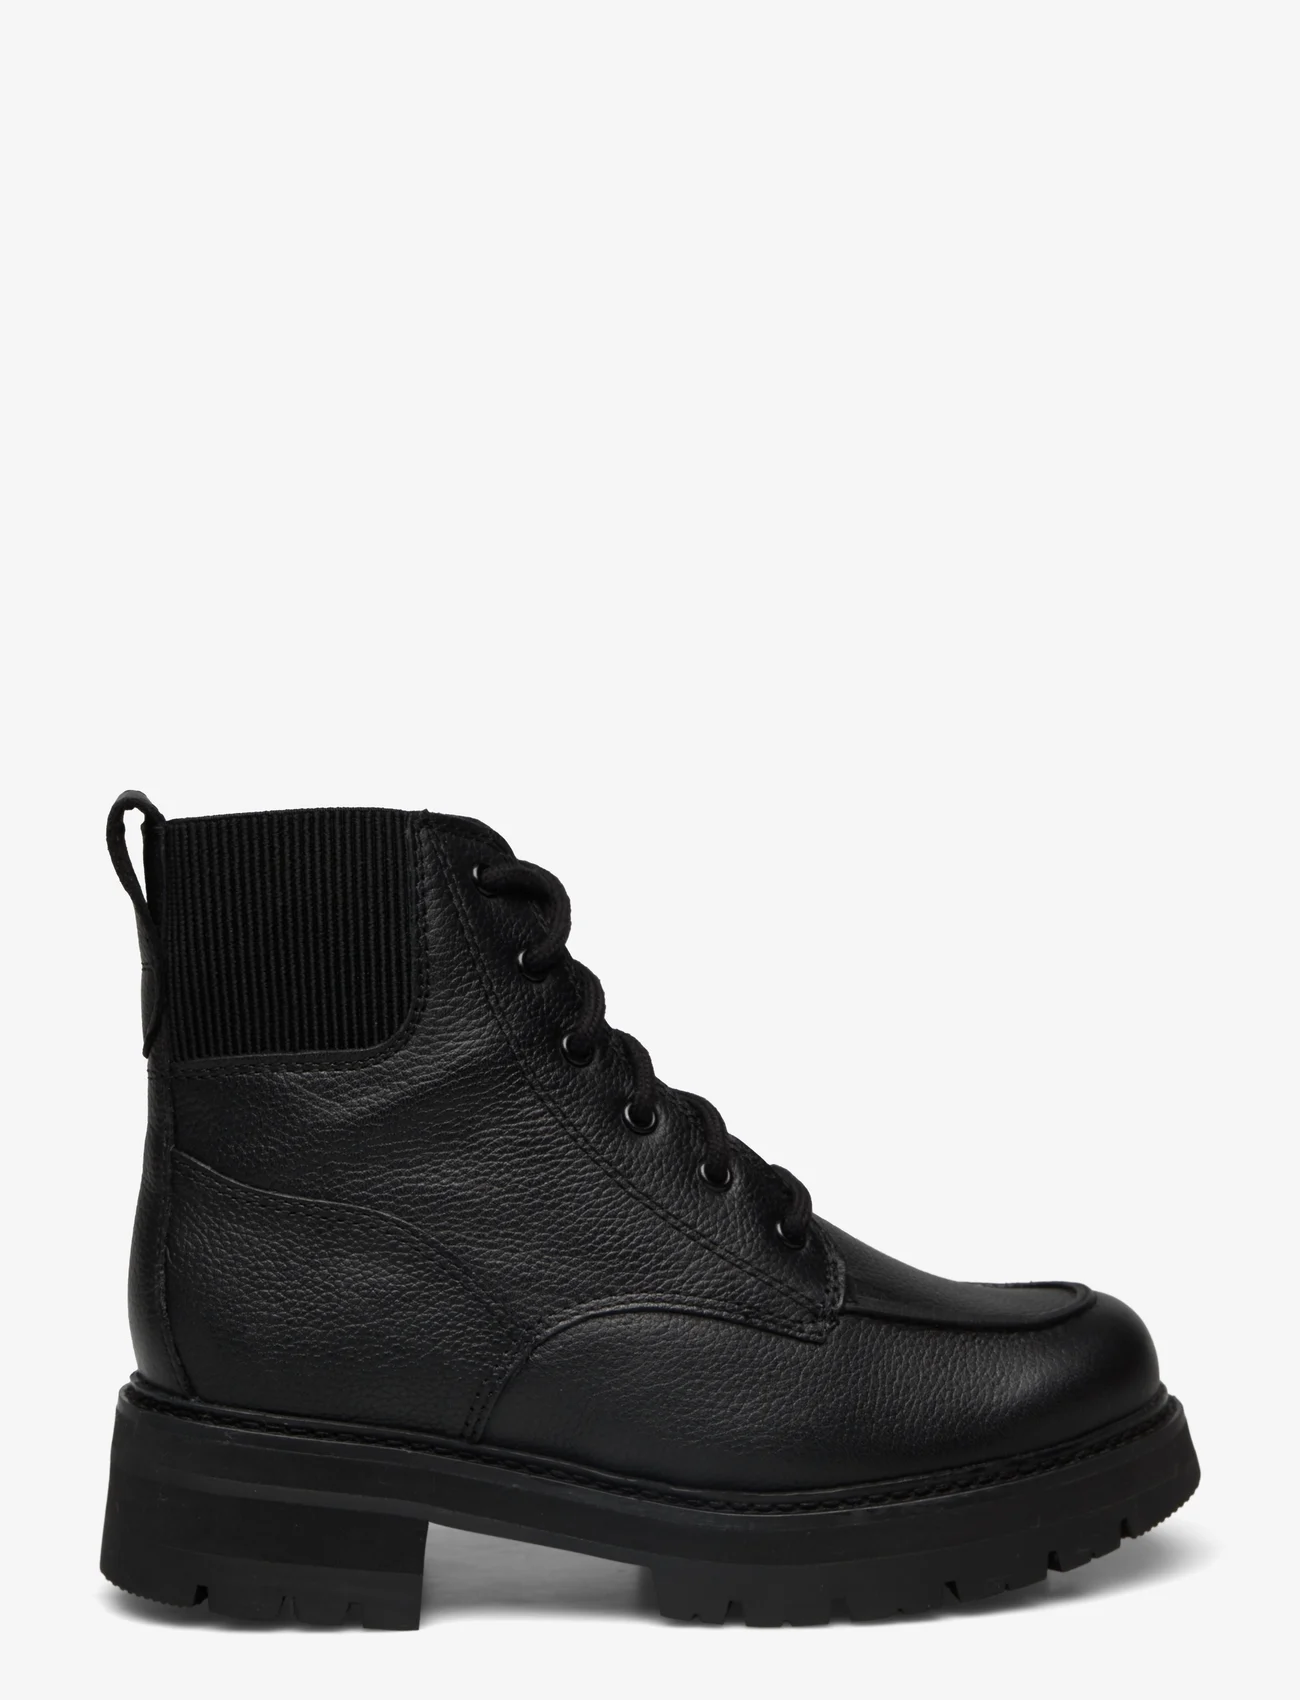 Clarks - Orianna Mid - laced boots - black wlined lea - 1